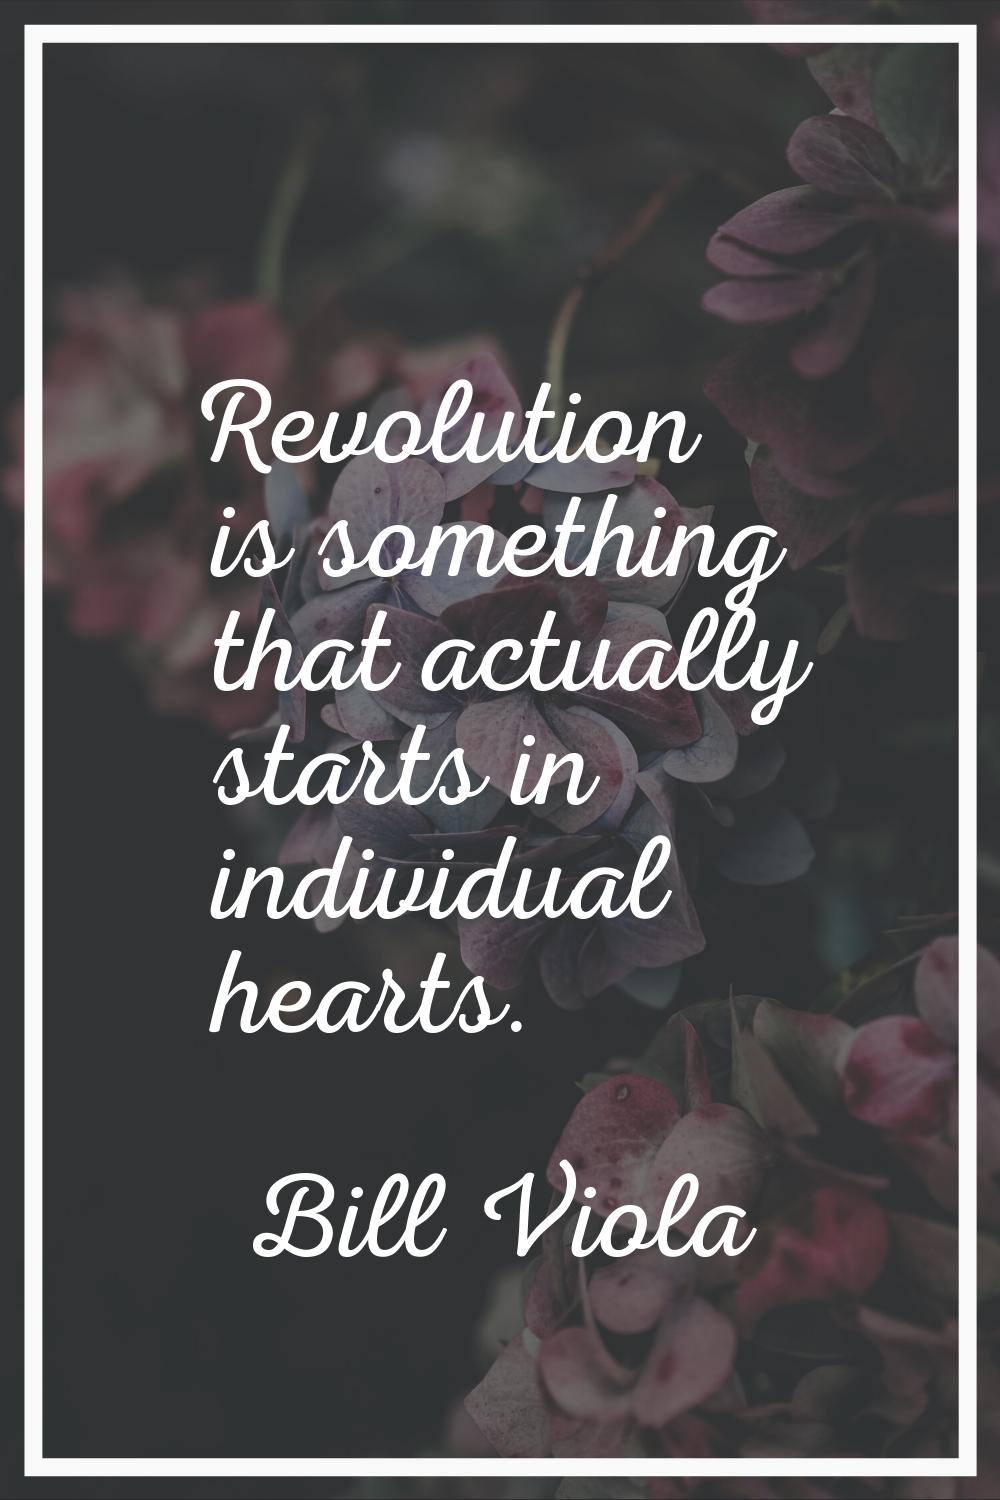 Revolution is something that actually starts in individual hearts.